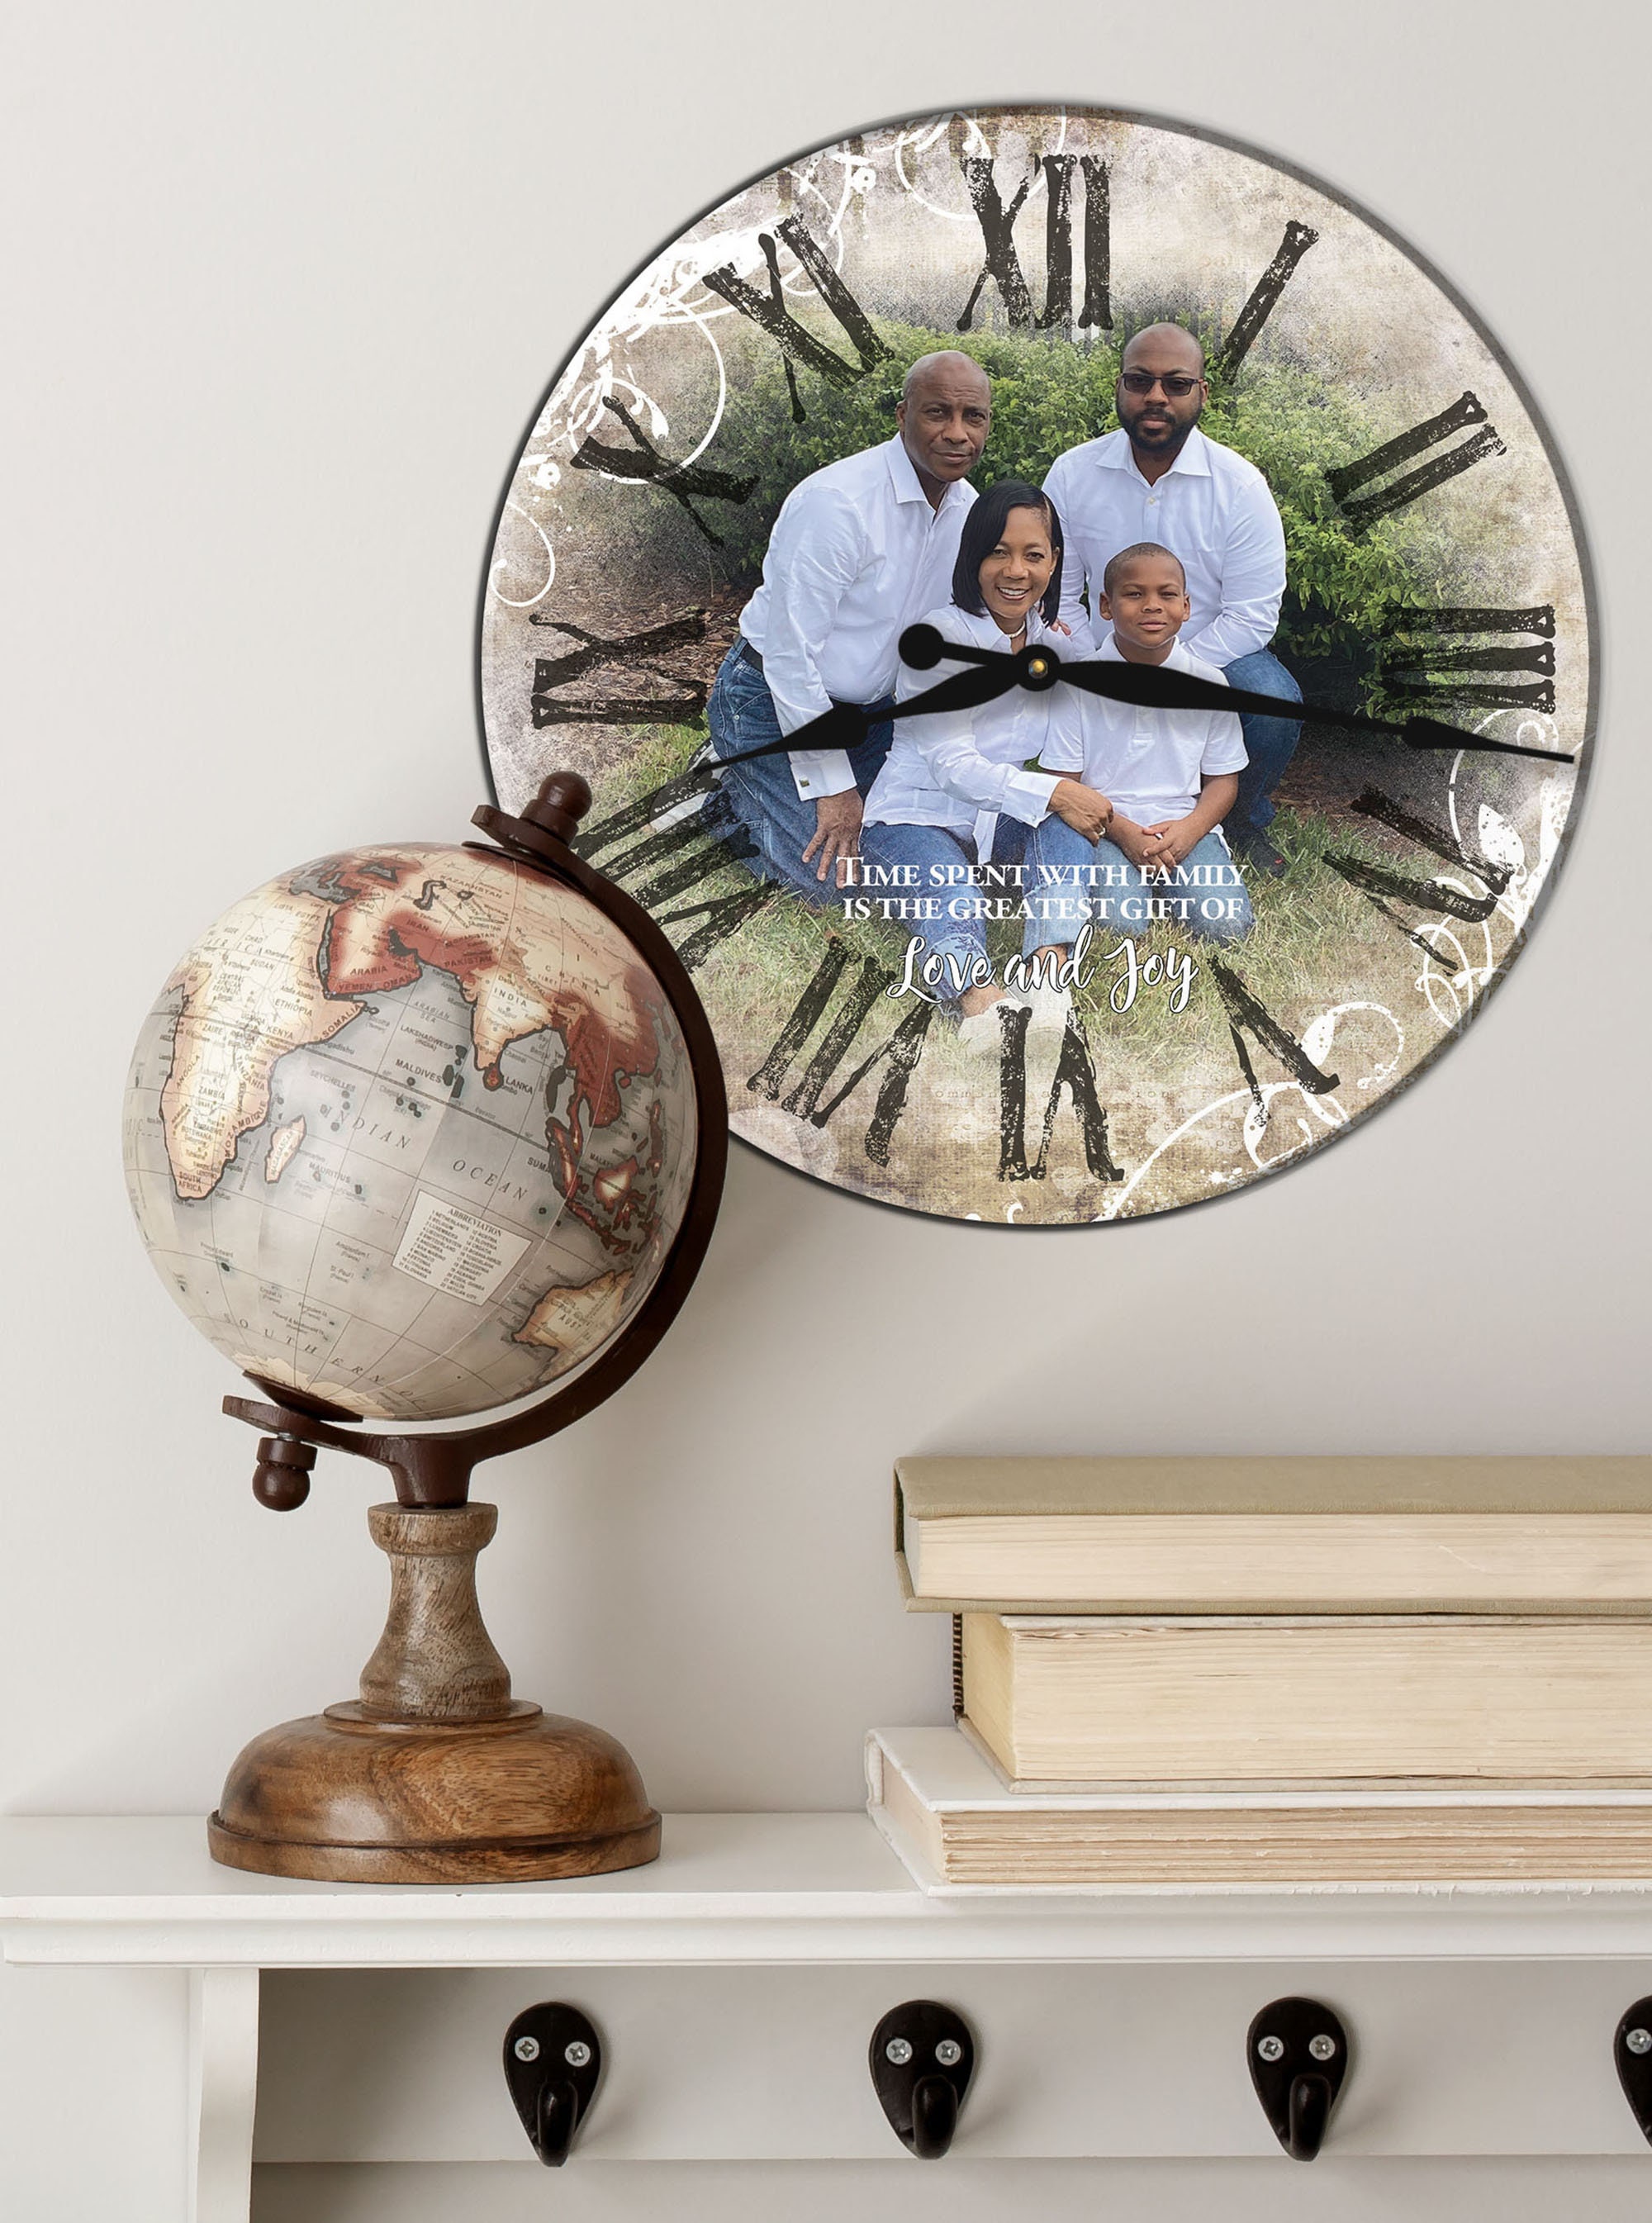 50th Anniversary Gifts For Parents, Golden Anniversary Gift, Now And Then  Picture Frame Art